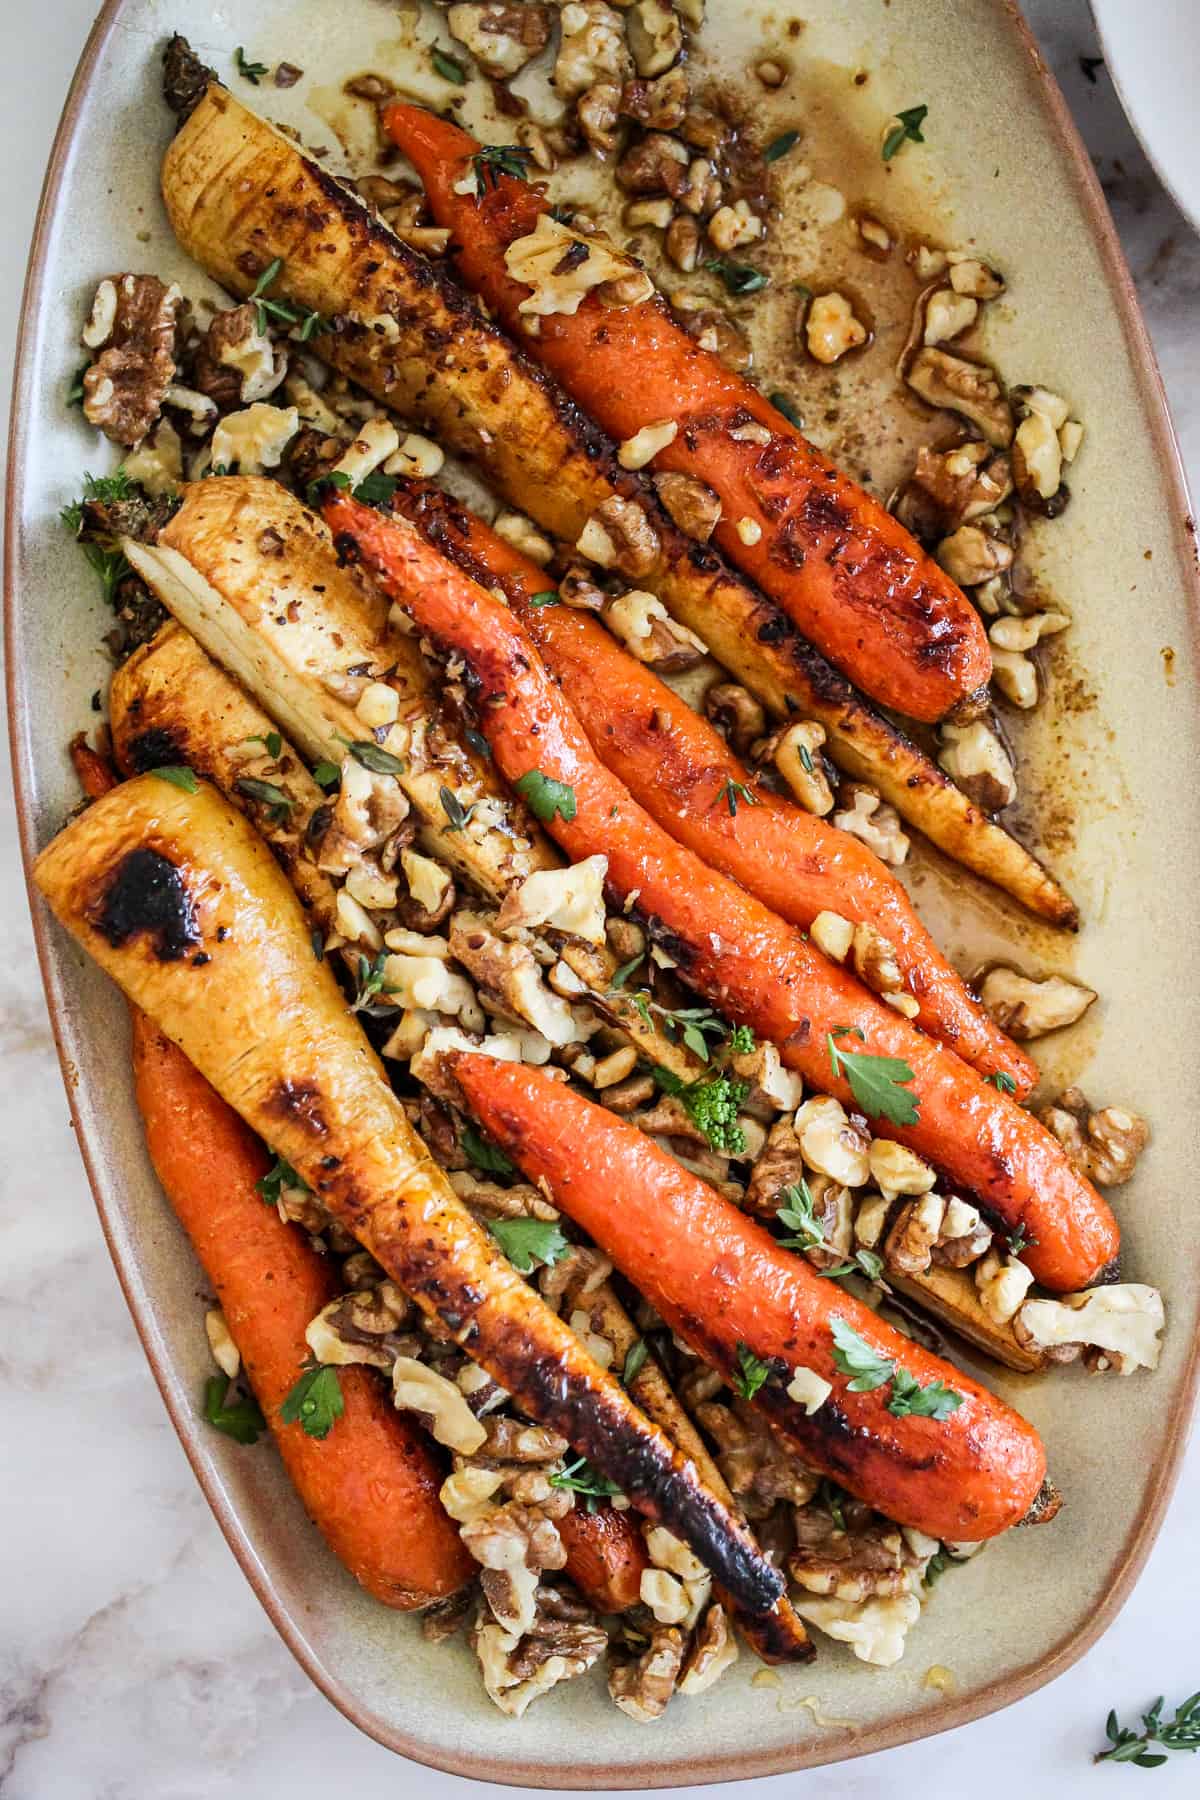 Overhead image of roasted carrots and parsnips on a beige serving platter.